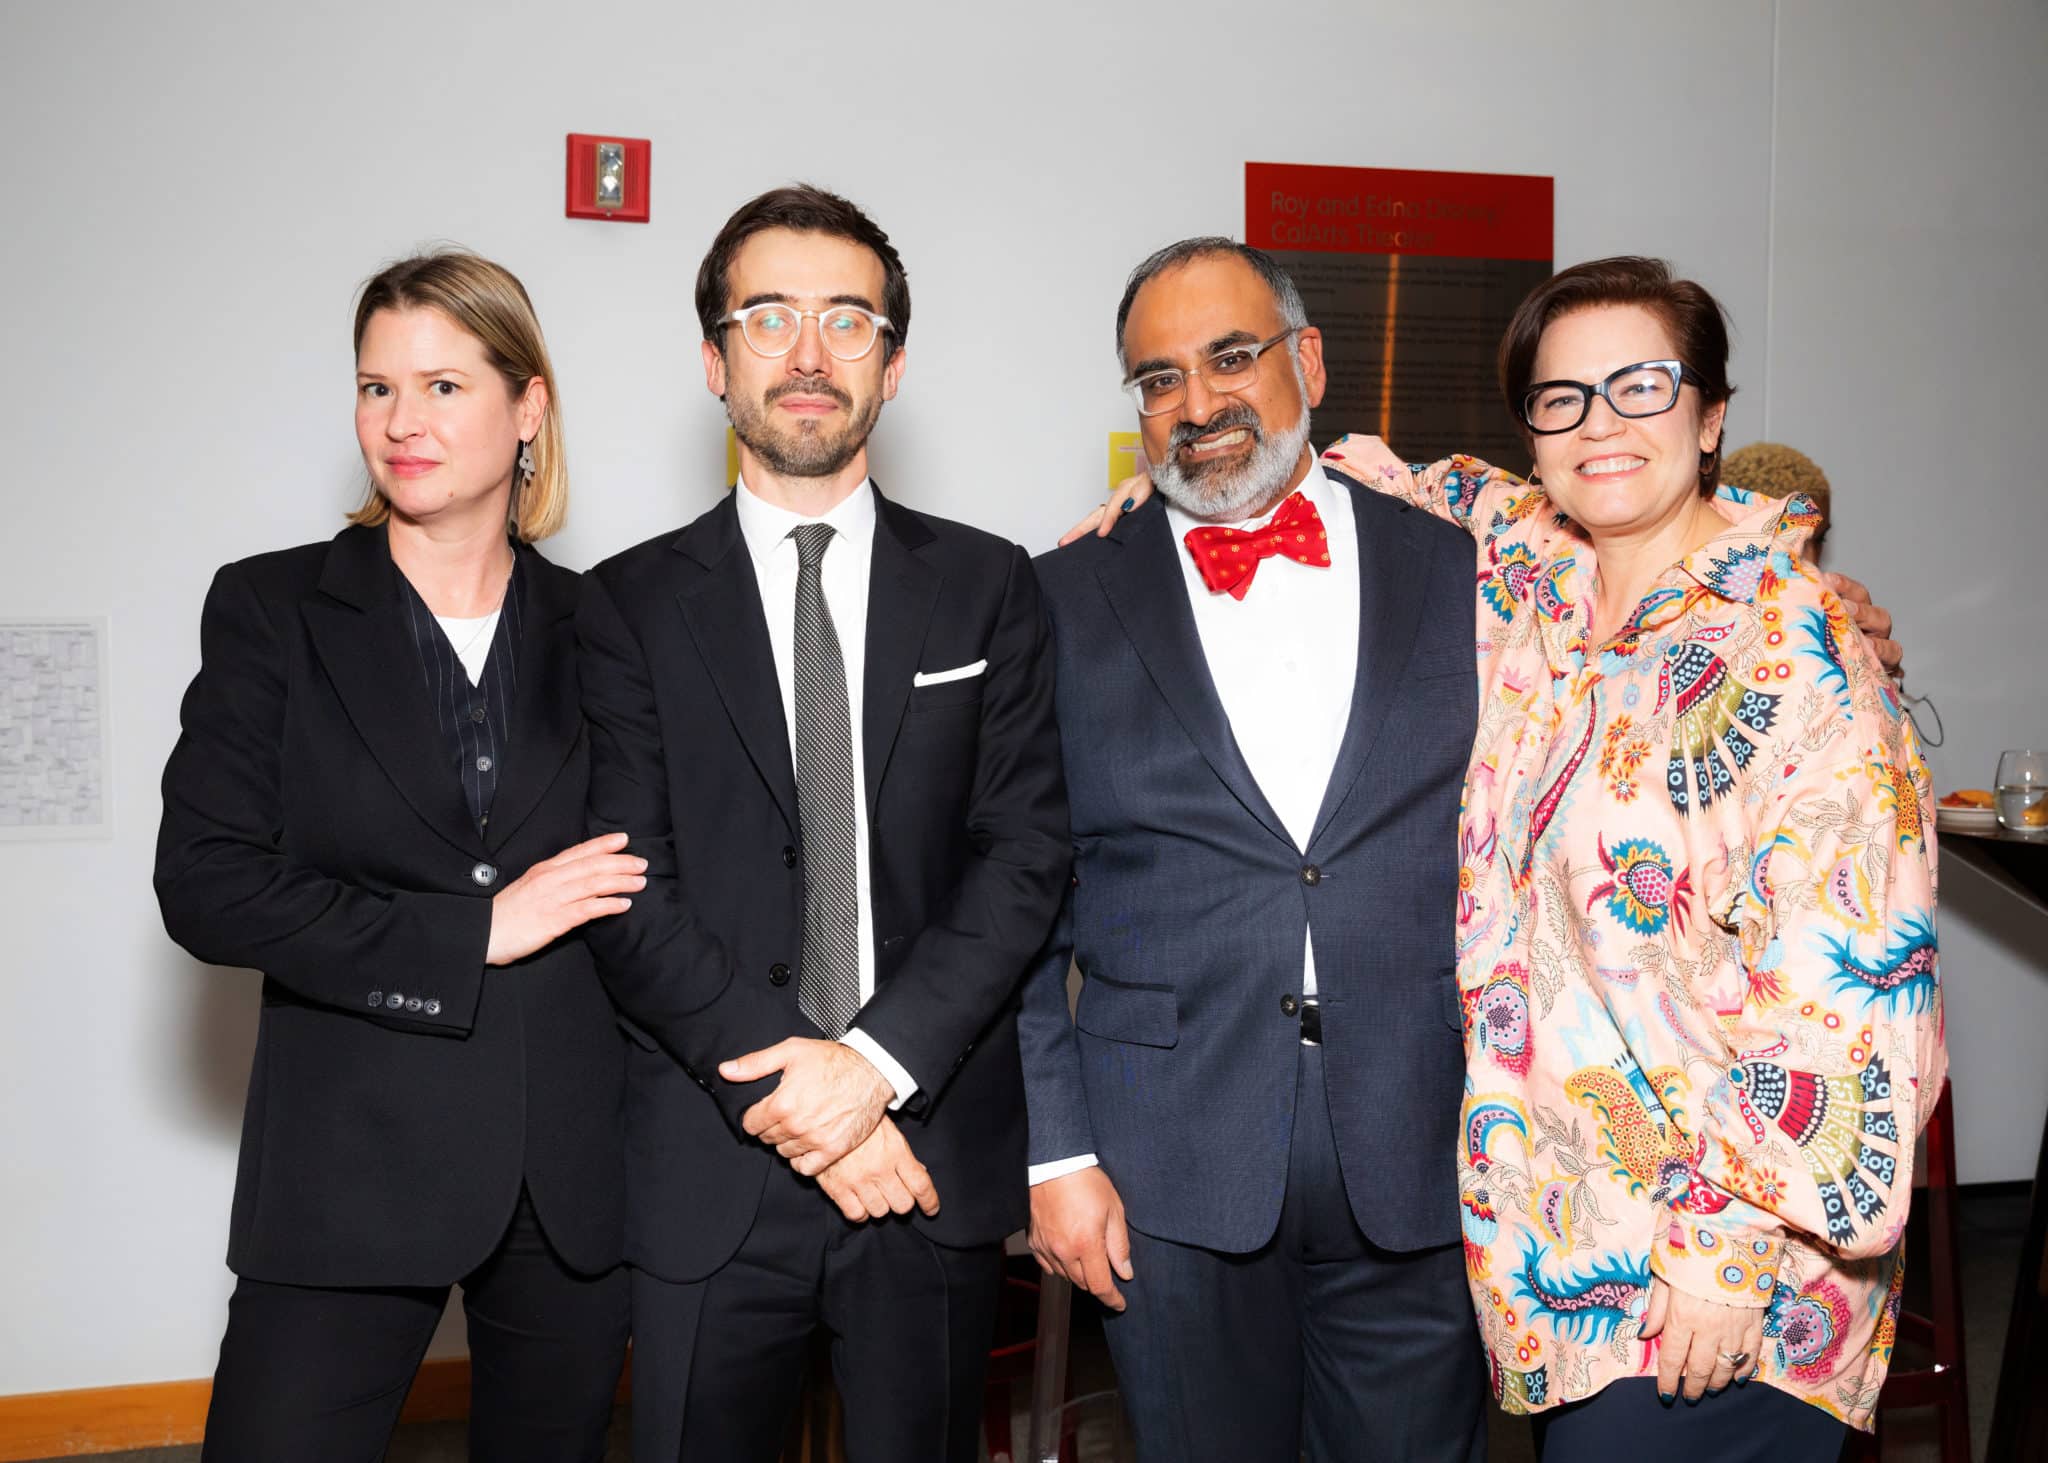 Distinguished attendees included Johanna Burton (Director of The Museum of Contemporary Art), Joāo Ribas (Steven D. Lavine Executive Director of the Roy and Edna Disney CalArts Theatre and Vice President for Cultural Partnerships), Ravi Rajan (CalArts President ), and Anne Ellegood (Good Works Executive Director of the Institute of Contemporary Art, Los Angeles).